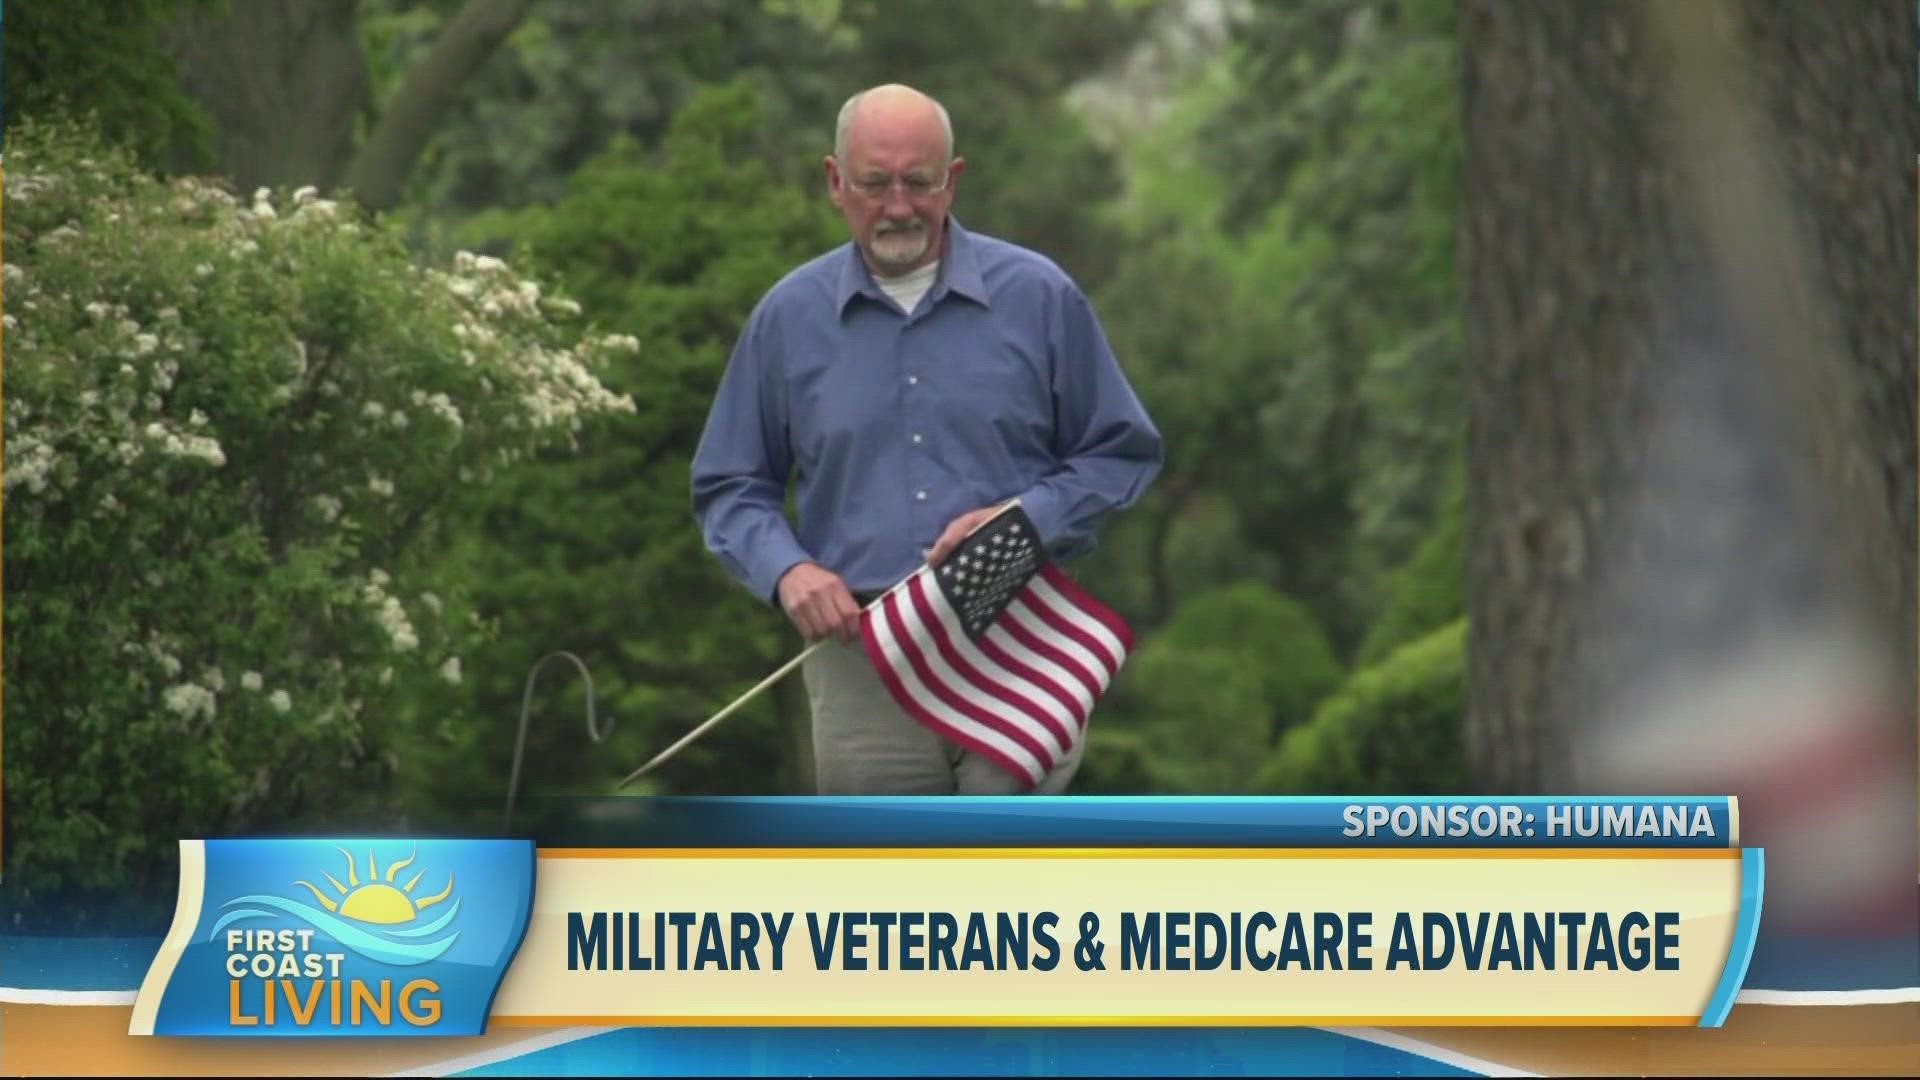 Hear what resources are available to help veterans select the coverage that’s right for them.